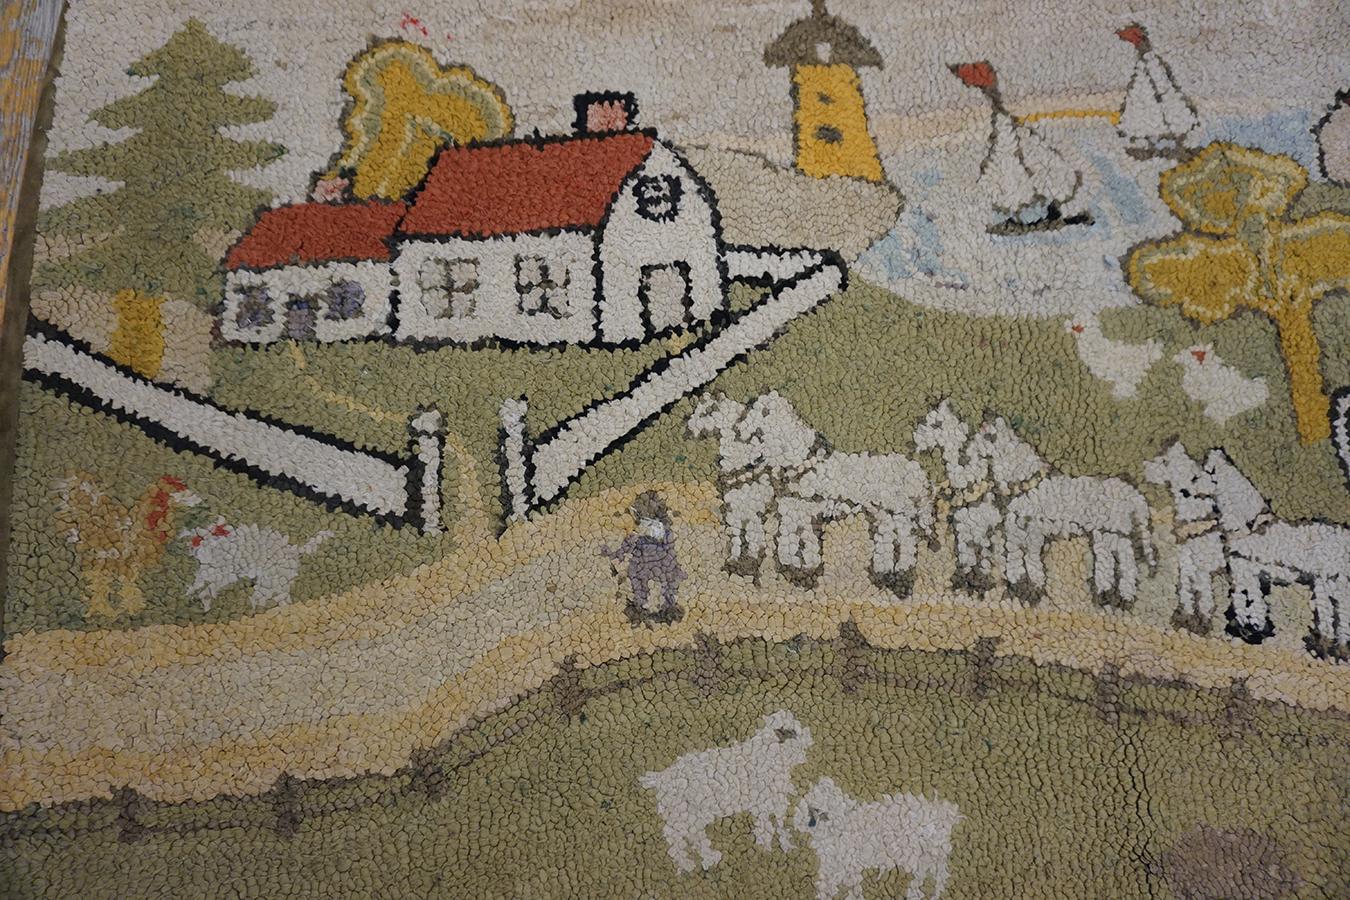 Hand-Woven 1930s Pictorial American Hooked Rug ( 2'10